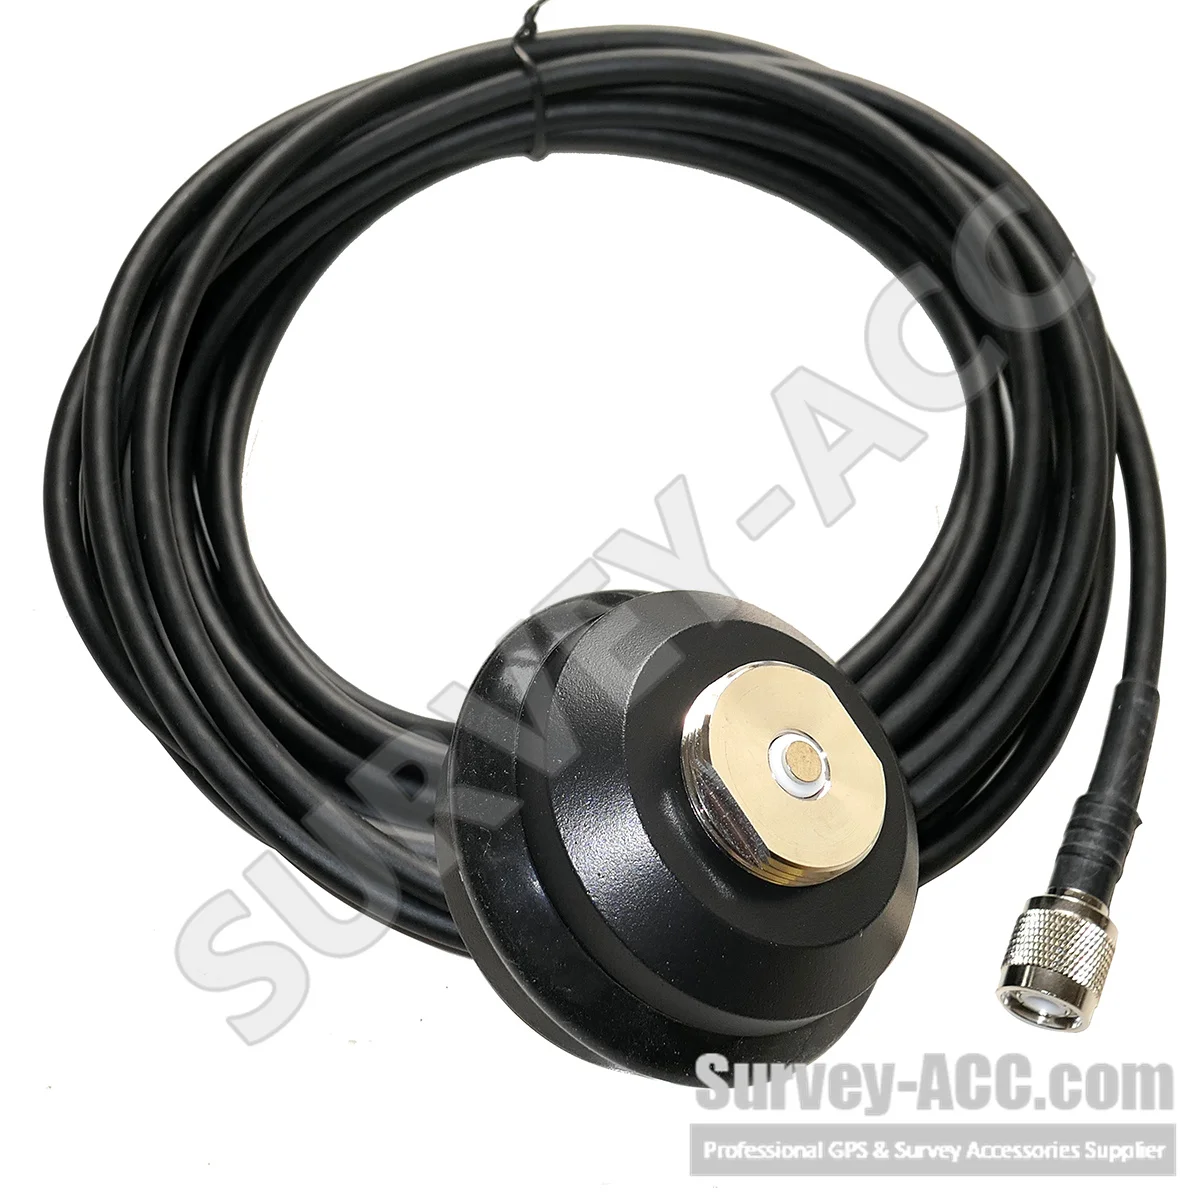 

Whip Antenna Pole Mount, 15m Cable, BNC connector for PDL Radio